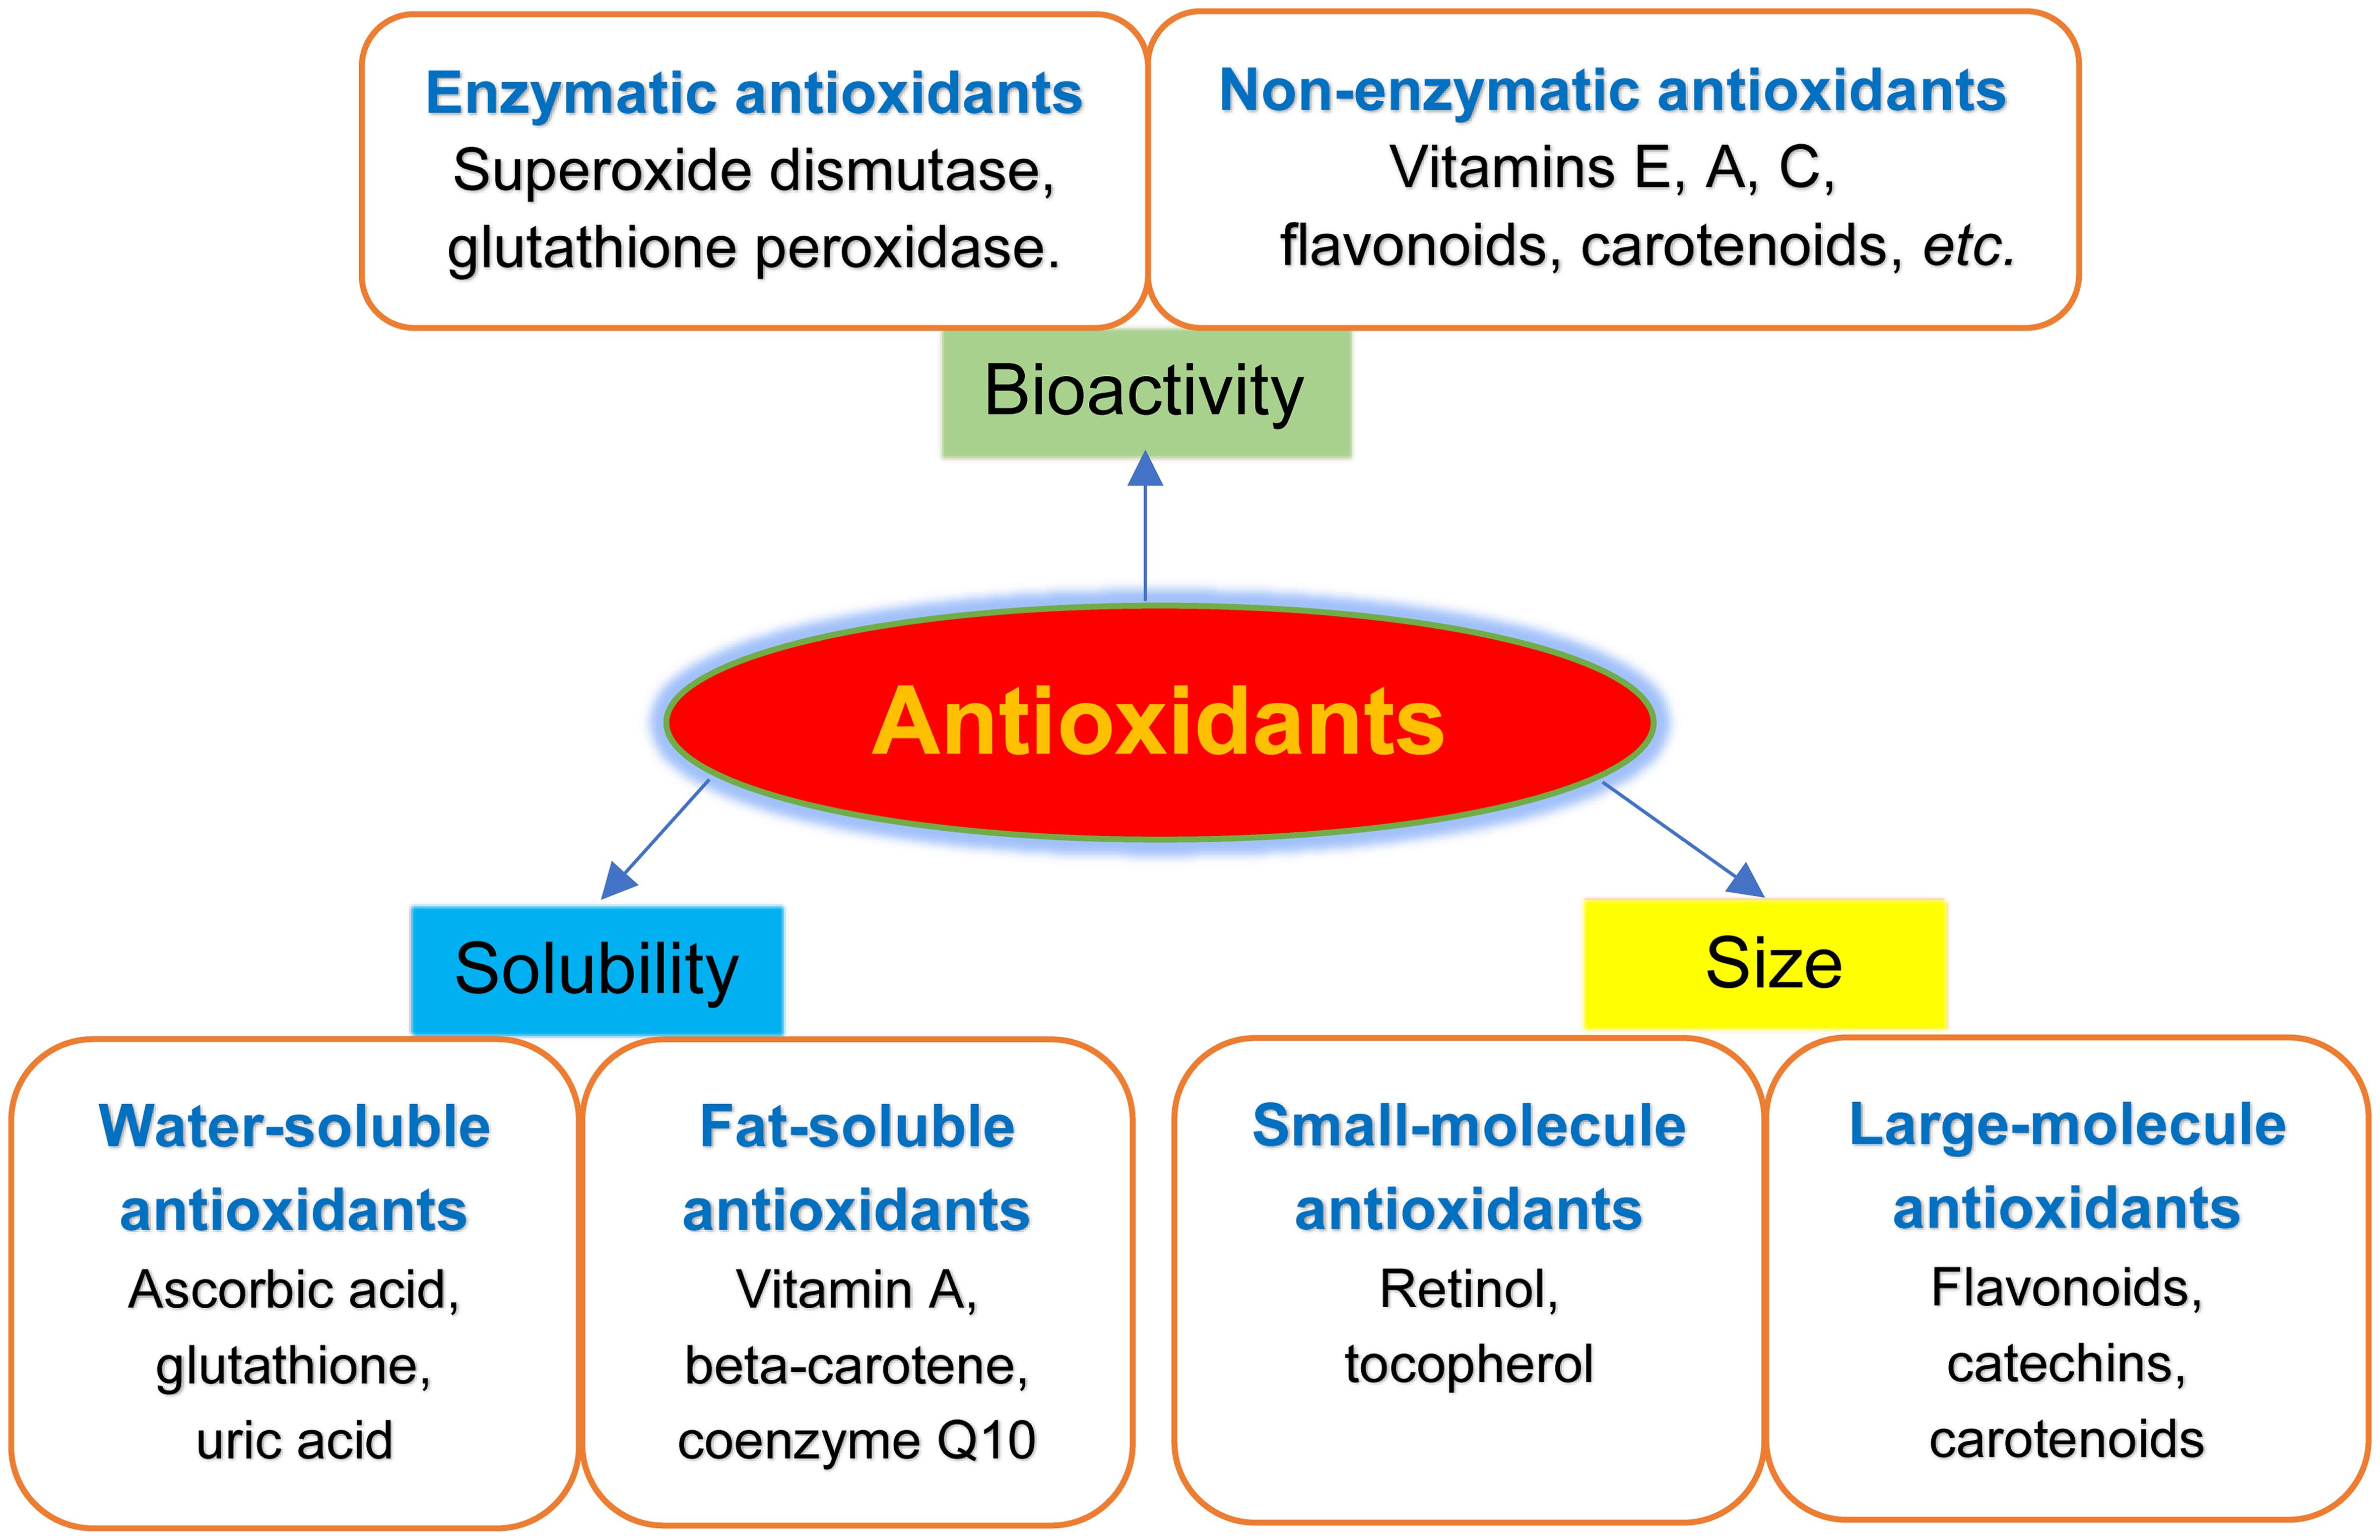 Antioxidant-related disorders